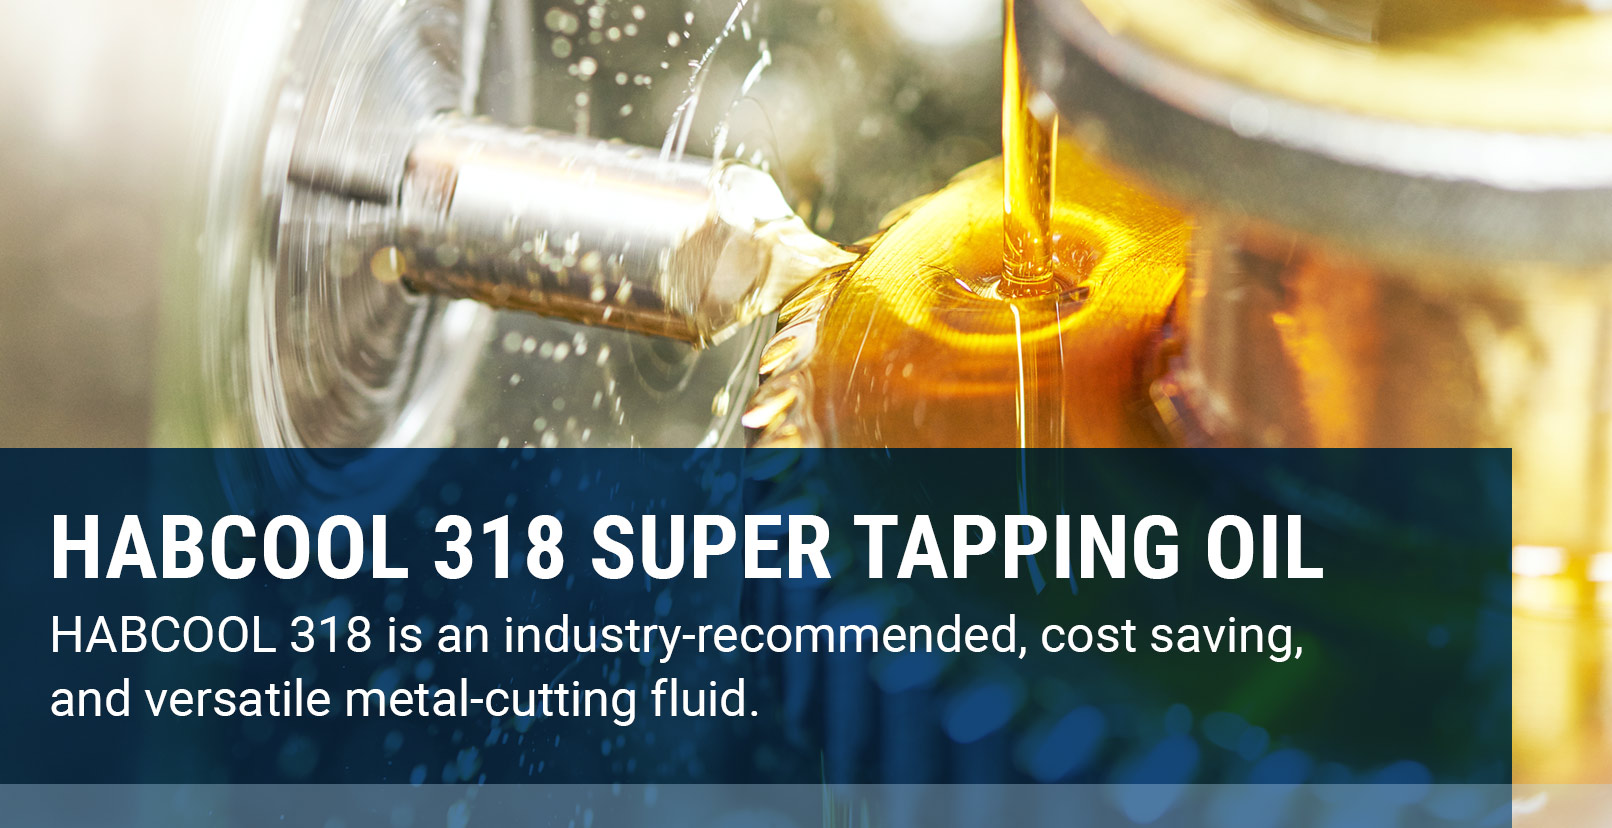 HABCOOL 318 Super Tapping Oil